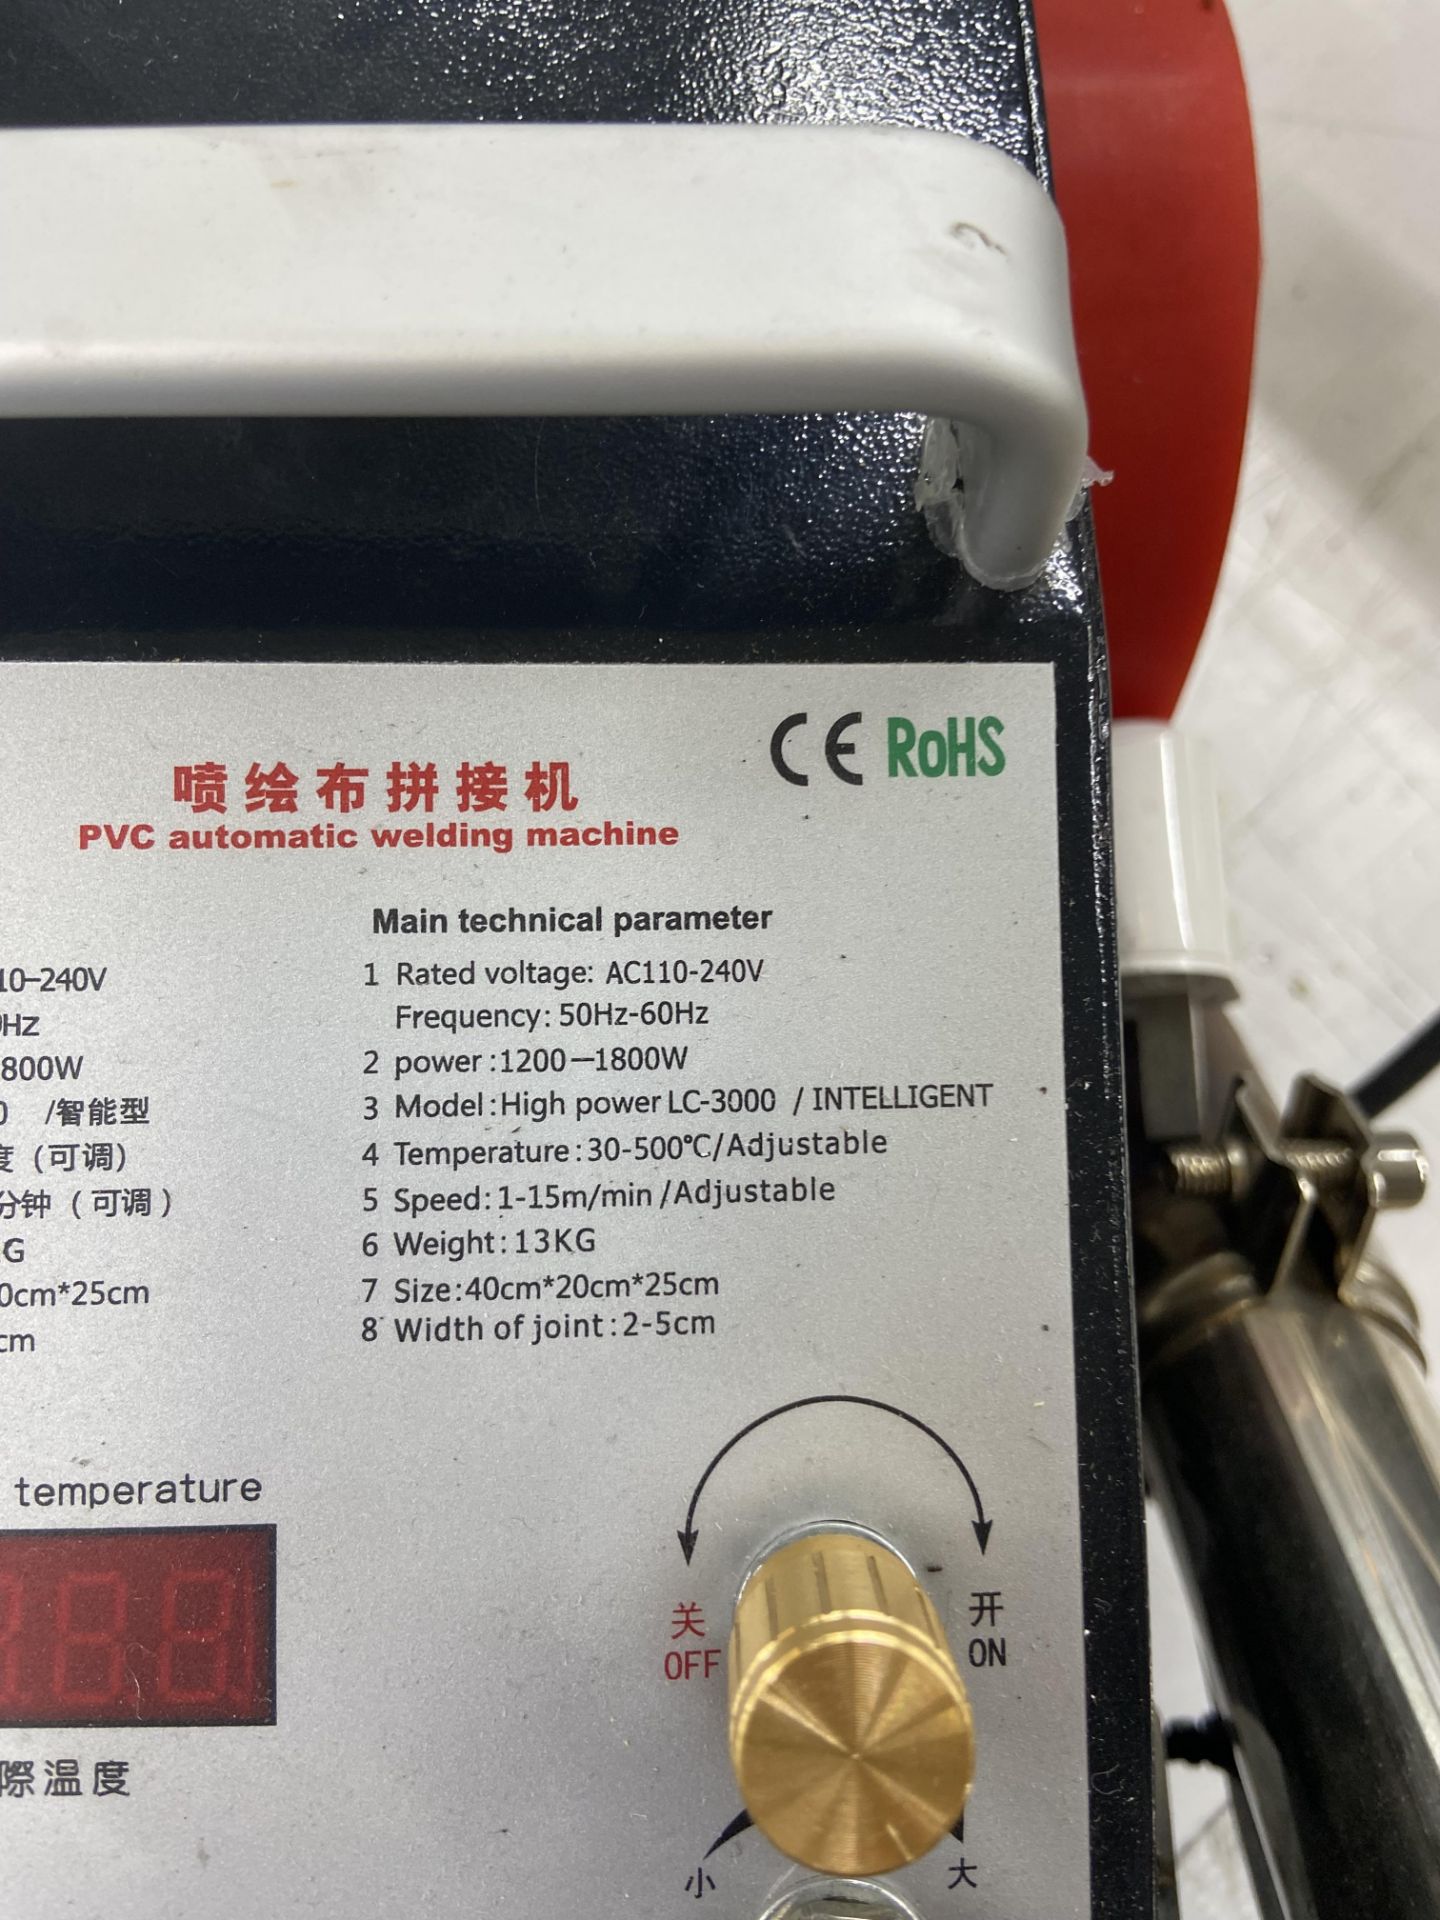 PVC Automatic Welding Machine, with carrycase Please read the following important notes:- *** - Image 2 of 3